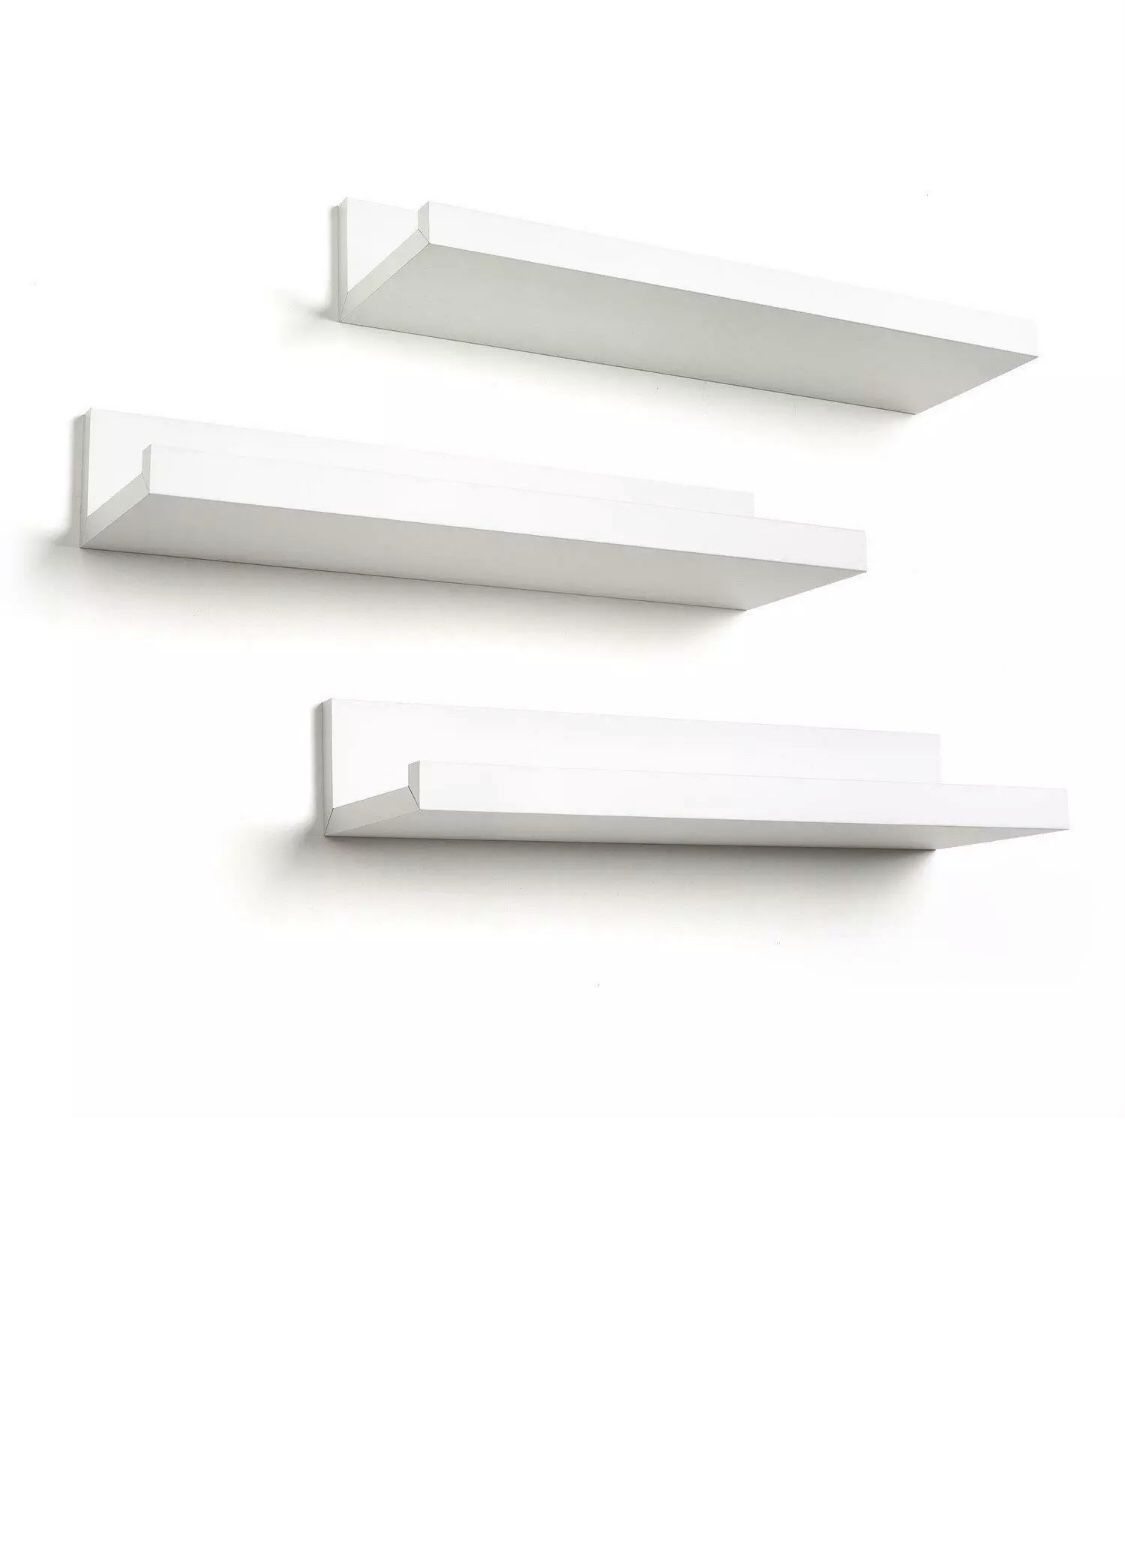 ❤️ BRAND NEW 3 PC FLOATING WALL SHELVES